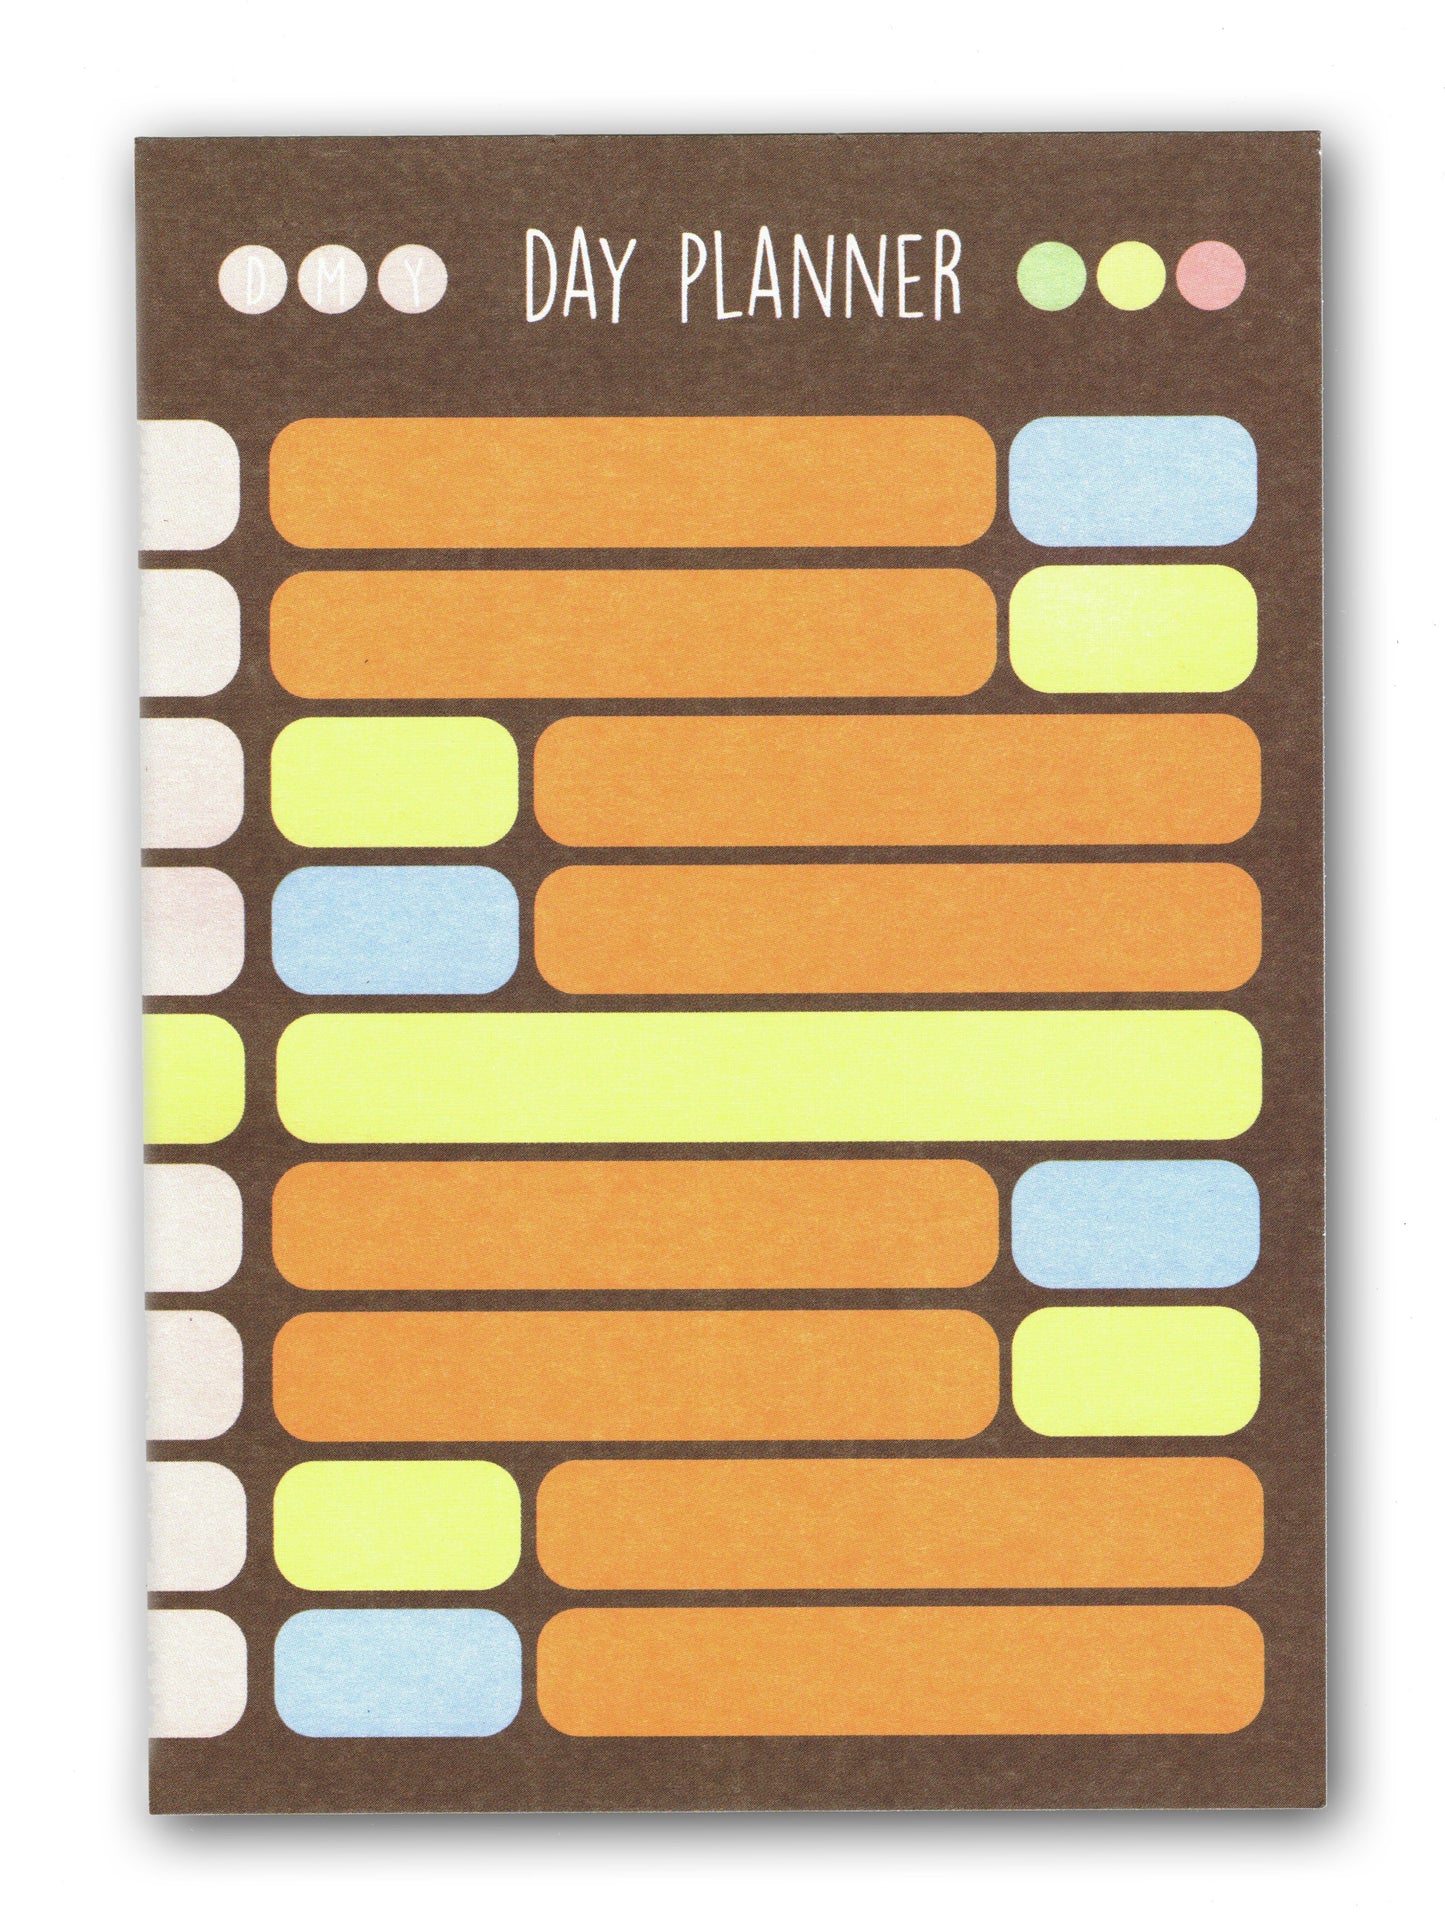 Day planners